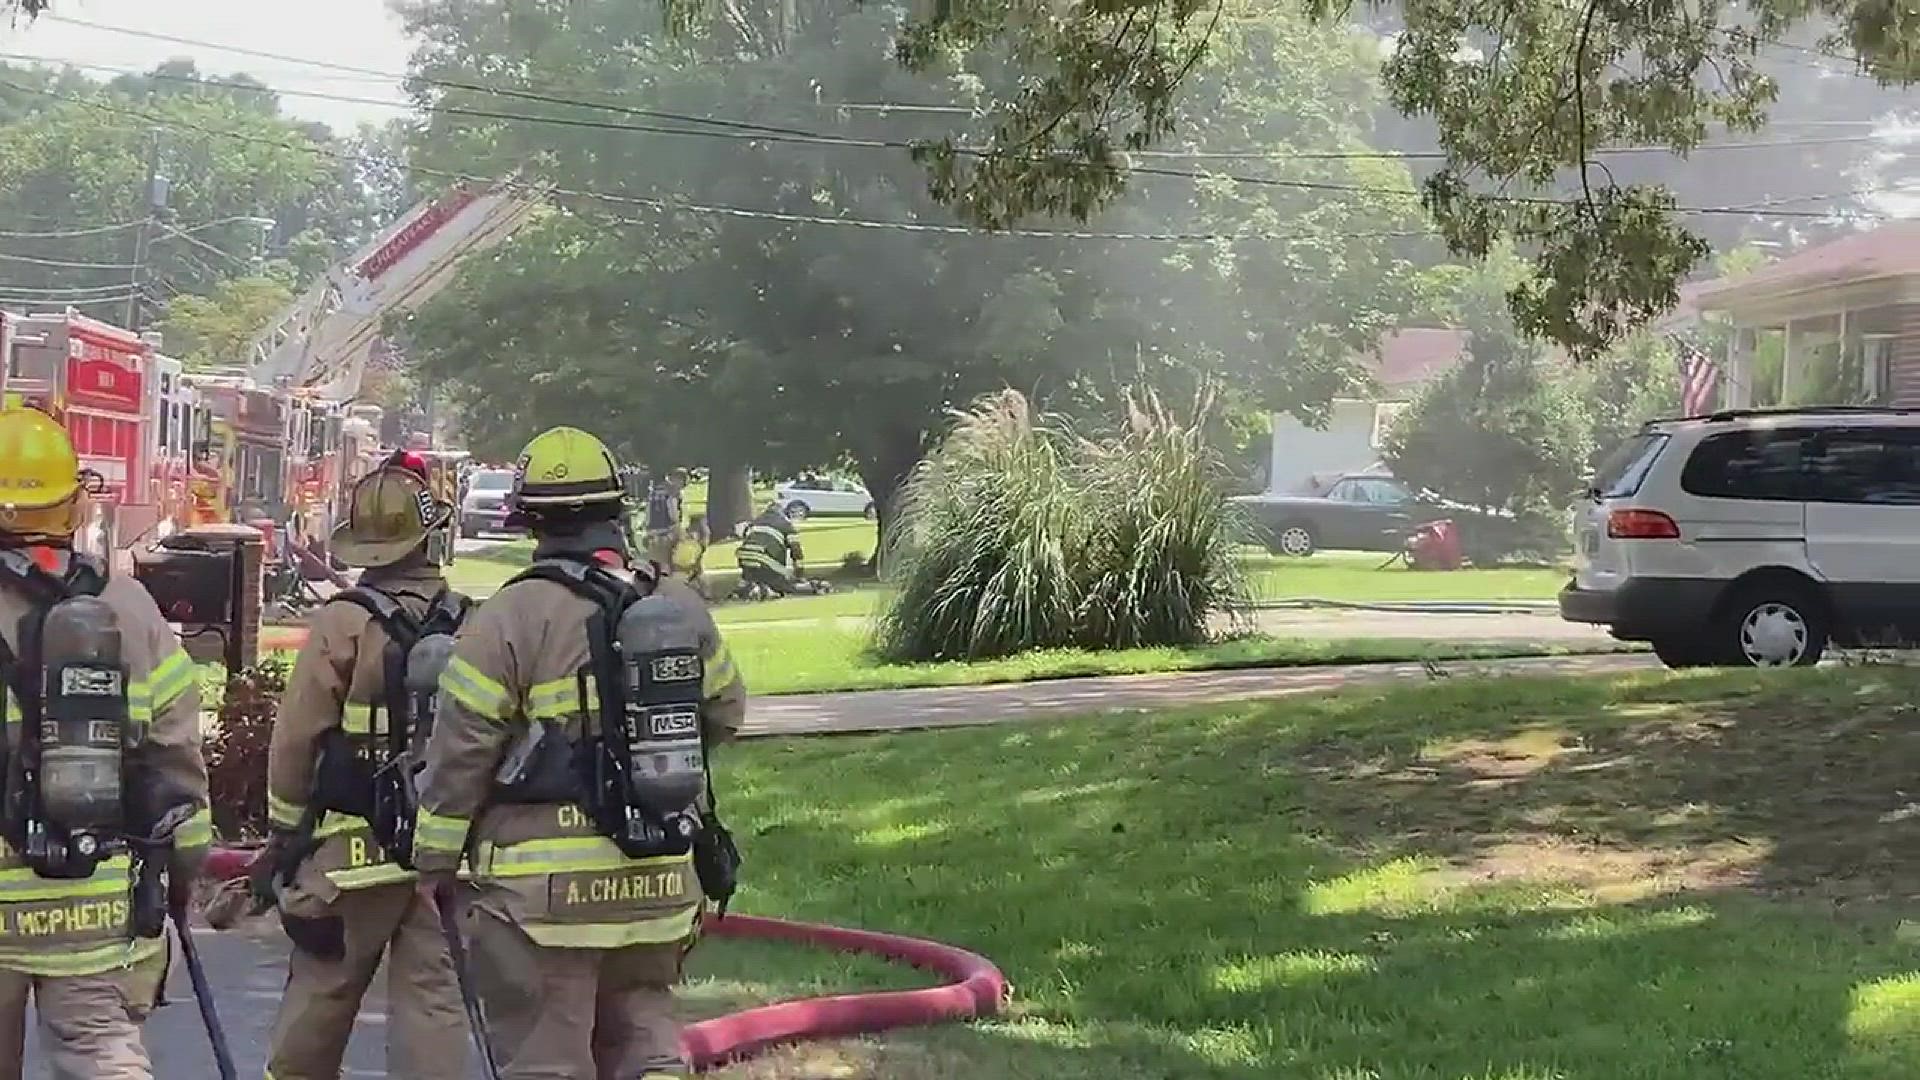 Viewer-submitted video: Firefighters attend Western Branch fire, Chesapeake.
Credit: Chad Kaiser